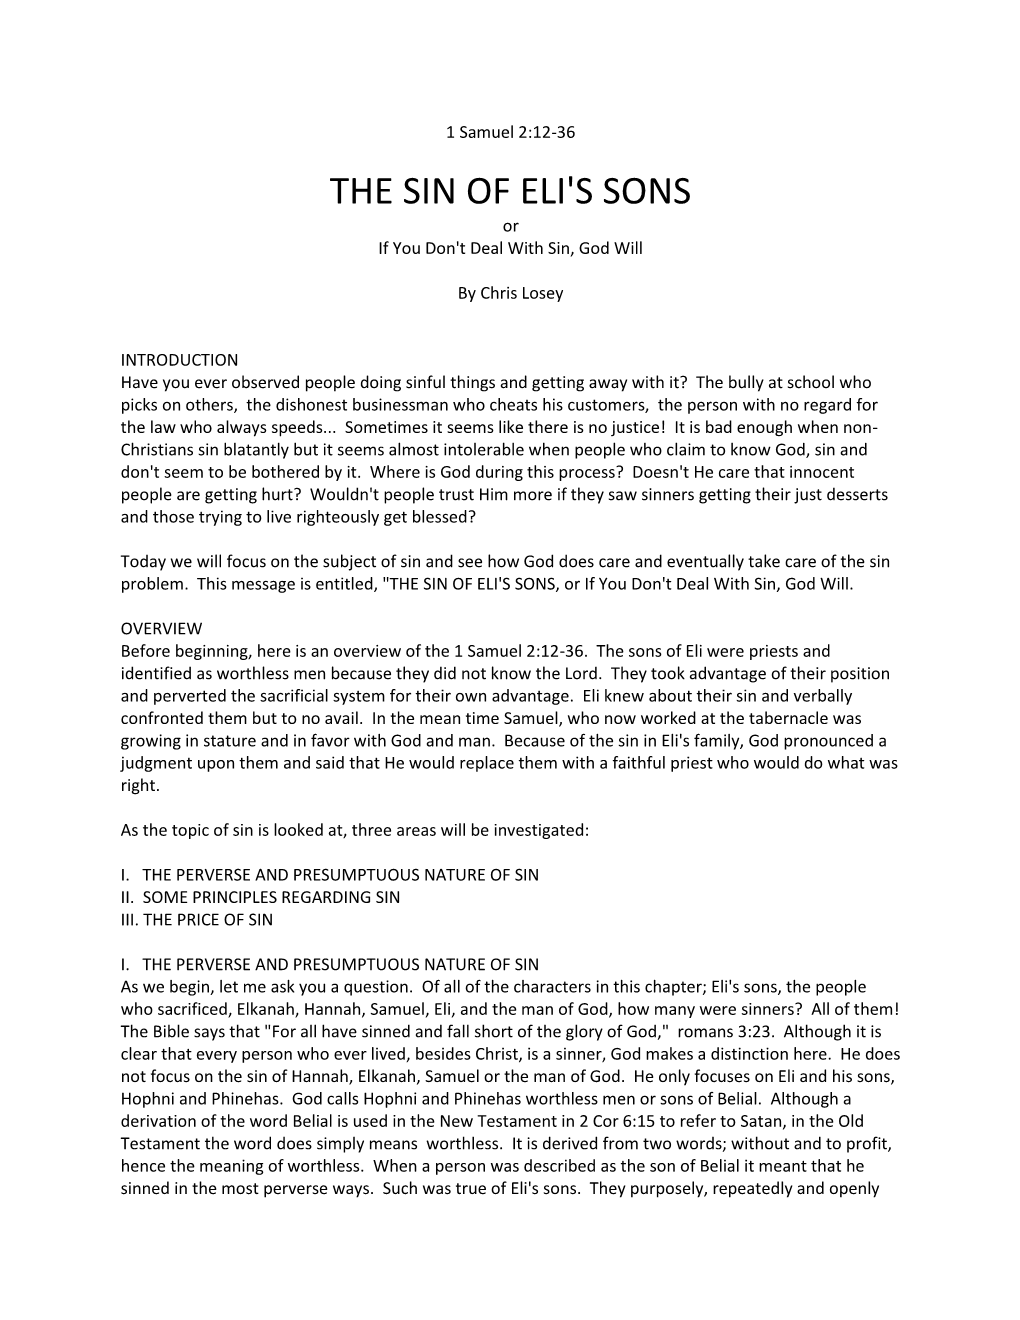 THE SIN of ELI's SONS Or If You Don't Deal with Sin, God Will